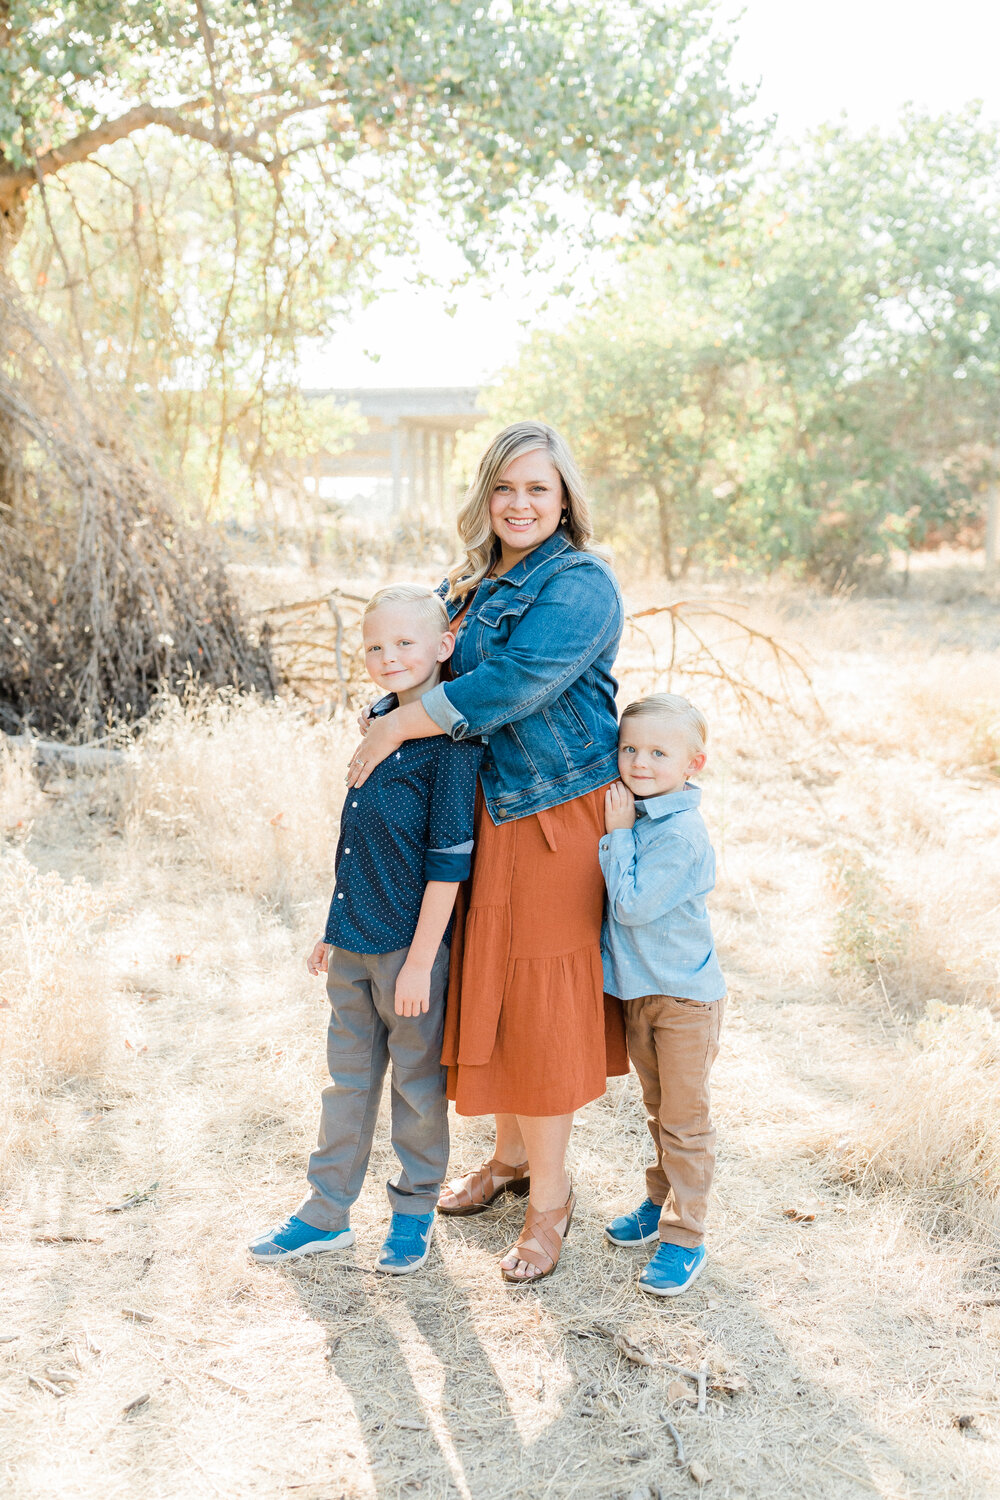 Plus Size Mama Clothing Options for Photos — Family Photographer